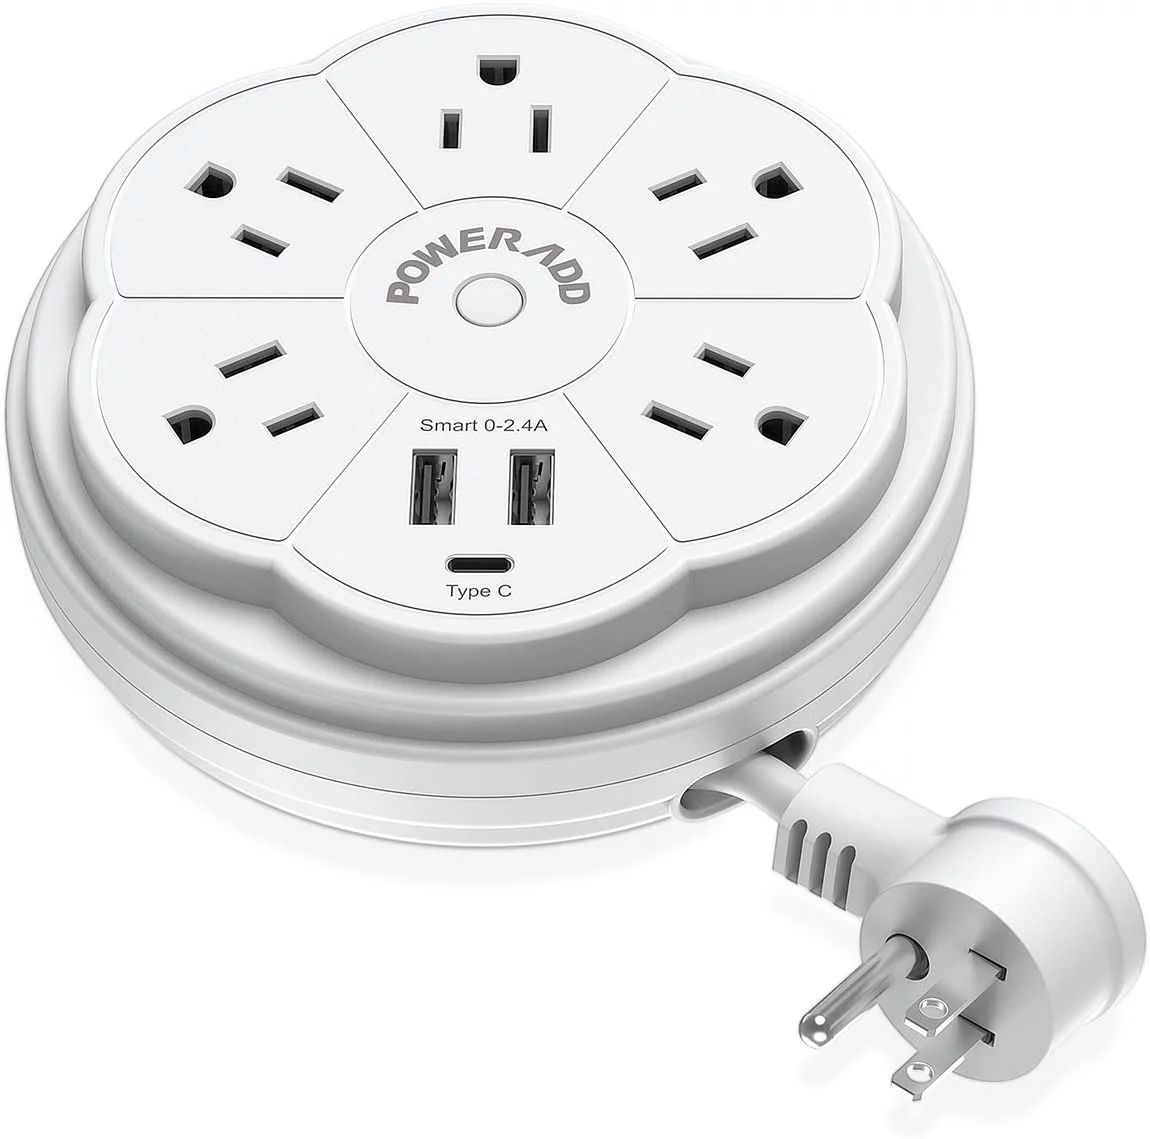 POWERADD Travel Power Strip 5 Outlet Surge Protector with Retractable Cord Smart USB Ports and Ty... | Walmart (US)